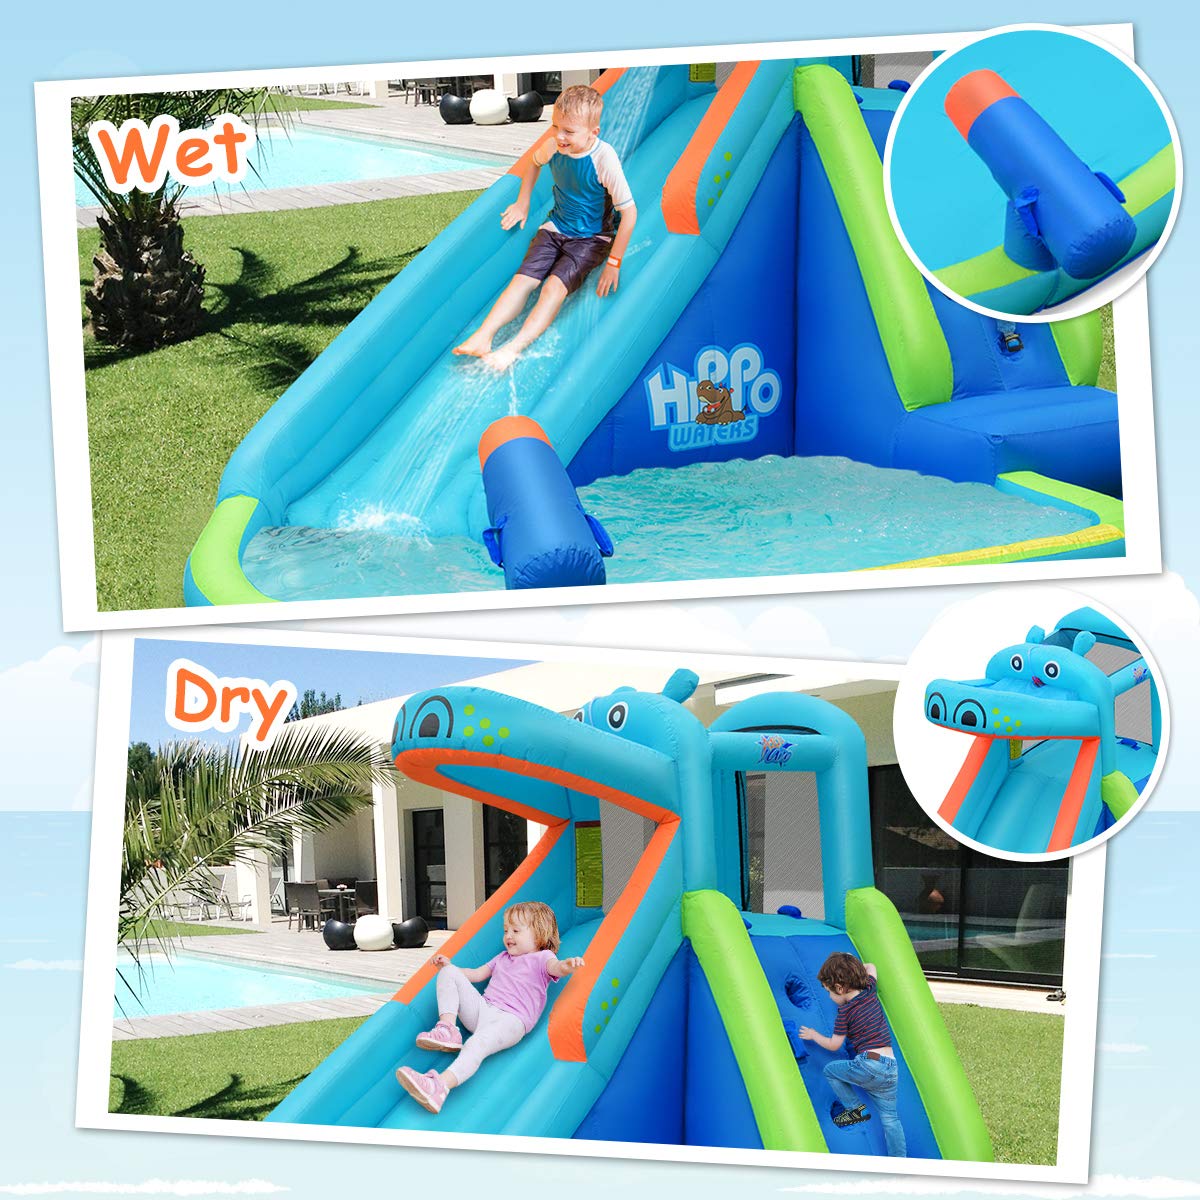 BOUNTECH Inflatable Water Slide, Hippo Themed Waterslide Park for Kids Backyard Outdoor Fun w/Long Slide, Splashing Pool, Blow up Water Slides Inflatables for Kids and Adults Party Gifts Hippo without Blower